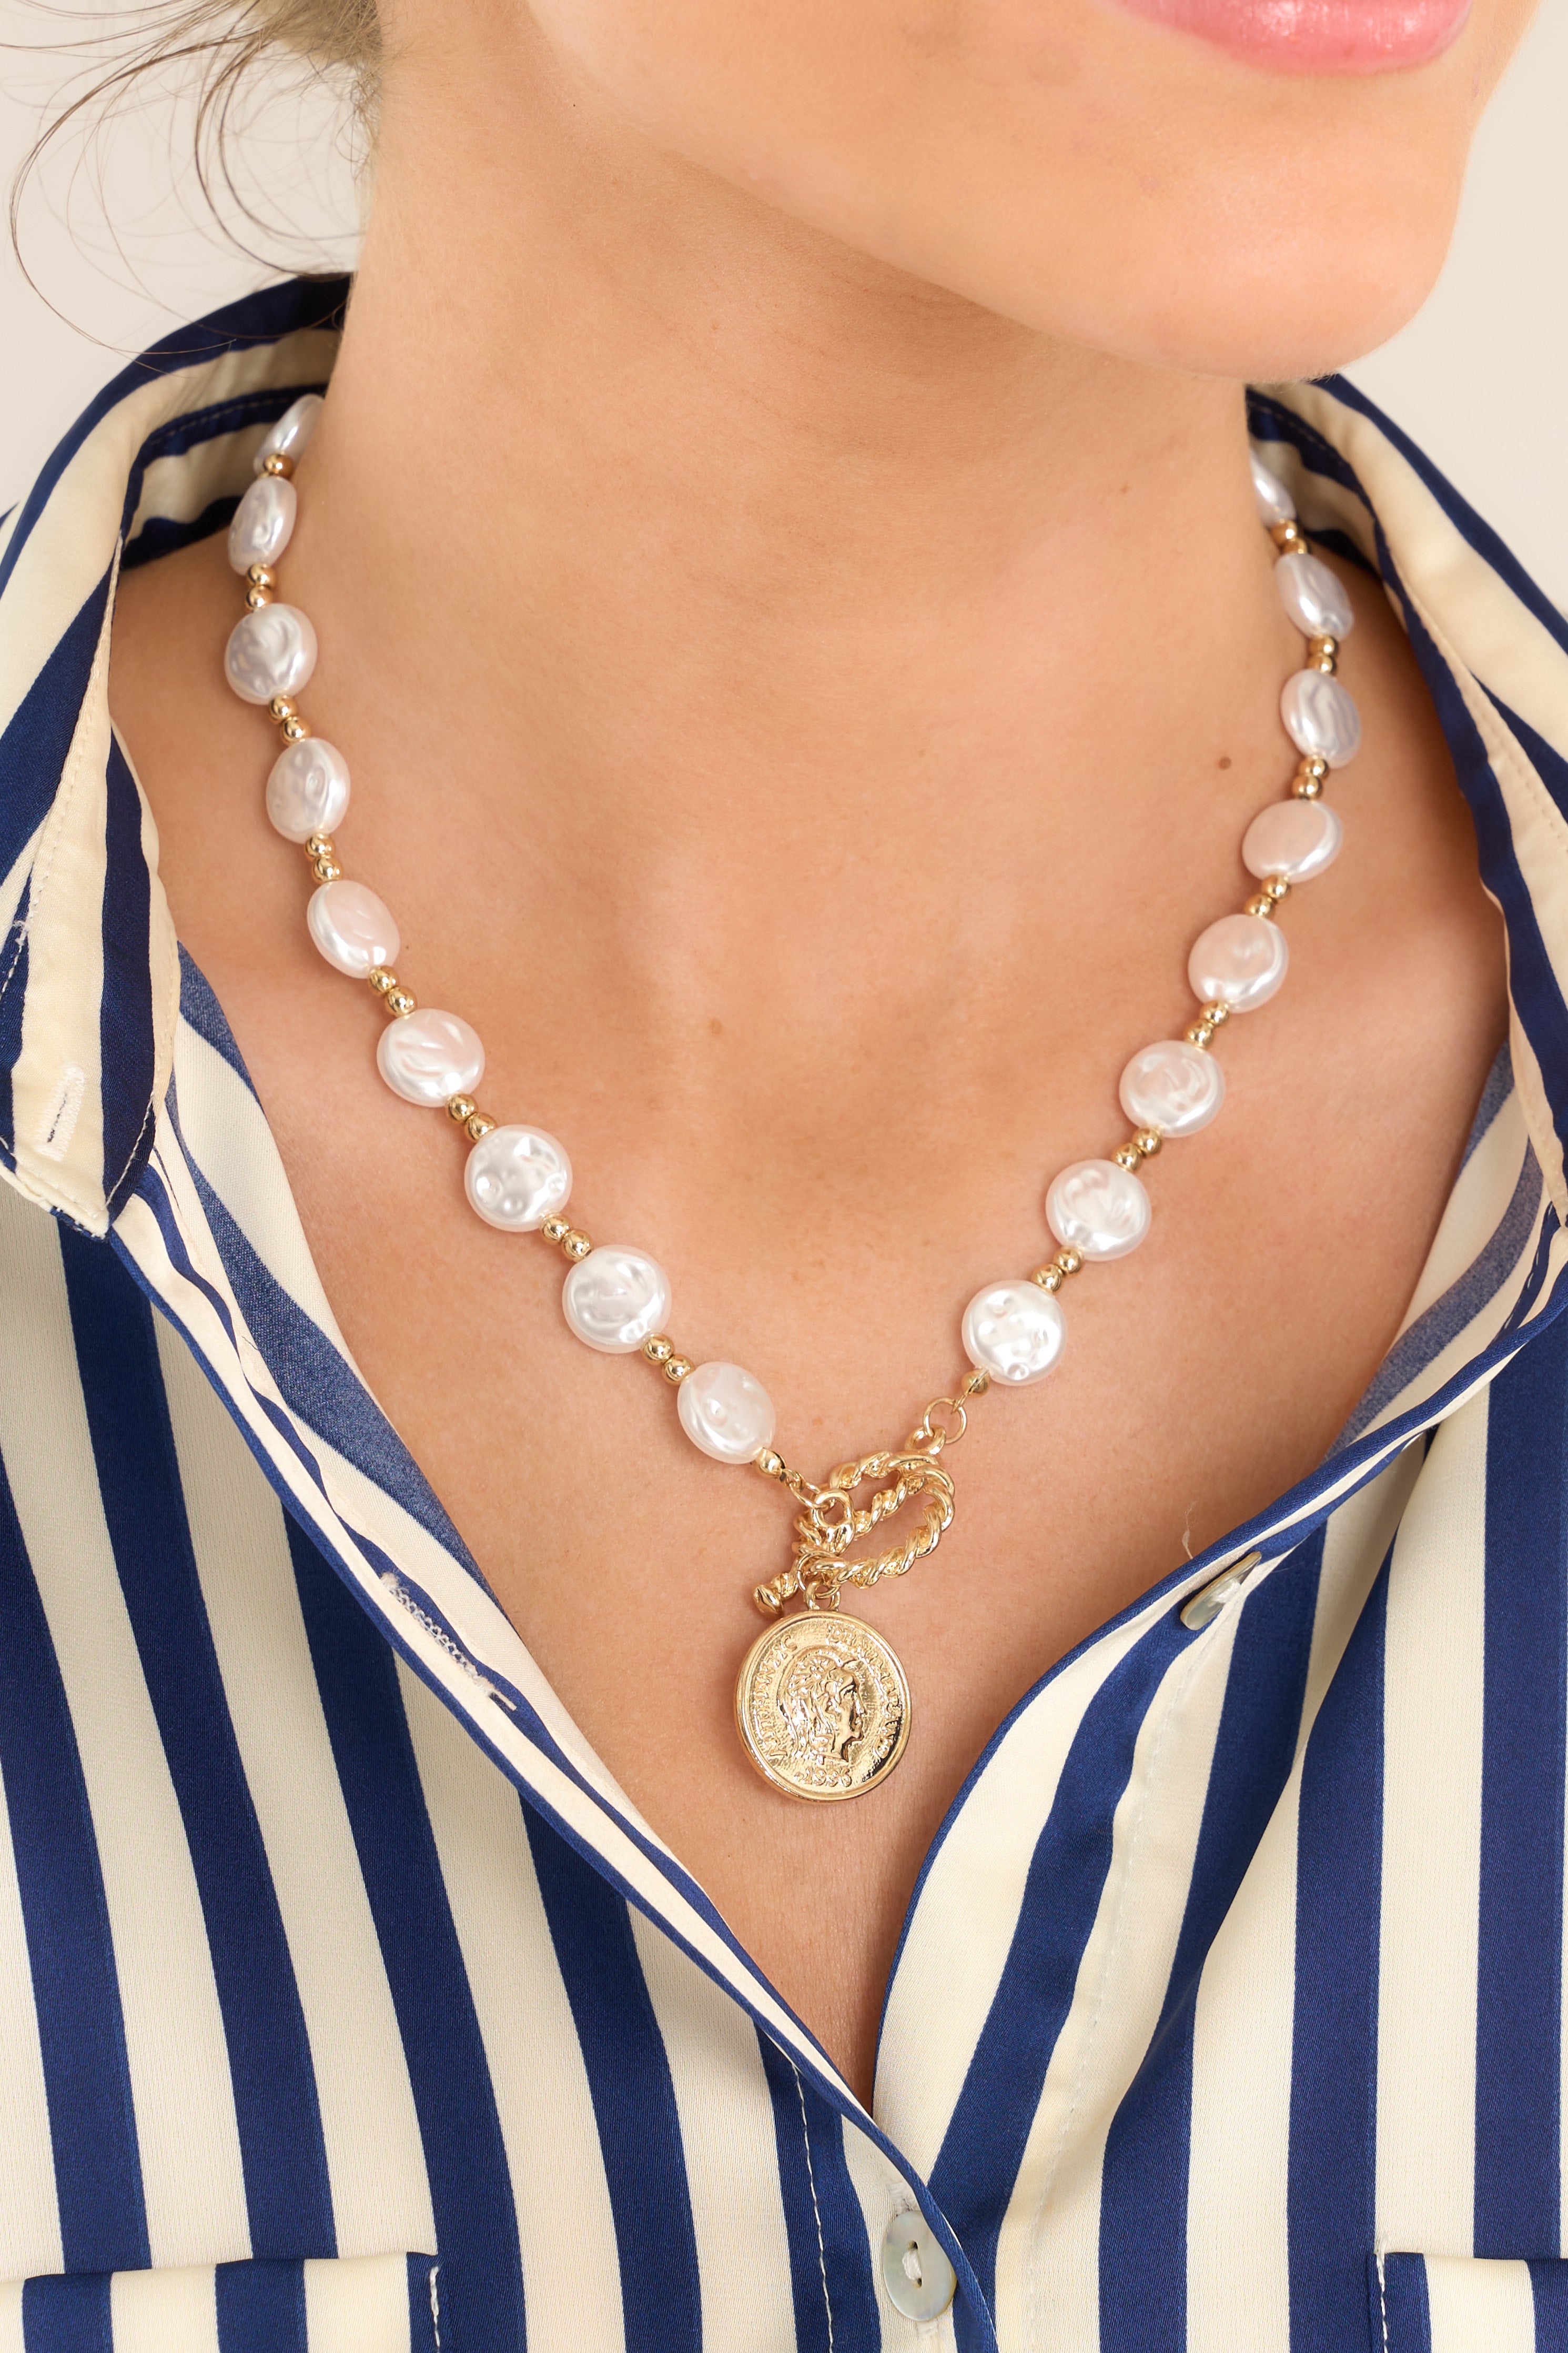 This gold and pearl necklace features gold hardware, flat faux pearls and small gold beads, a toggle closure, and a faux coin pendant. 